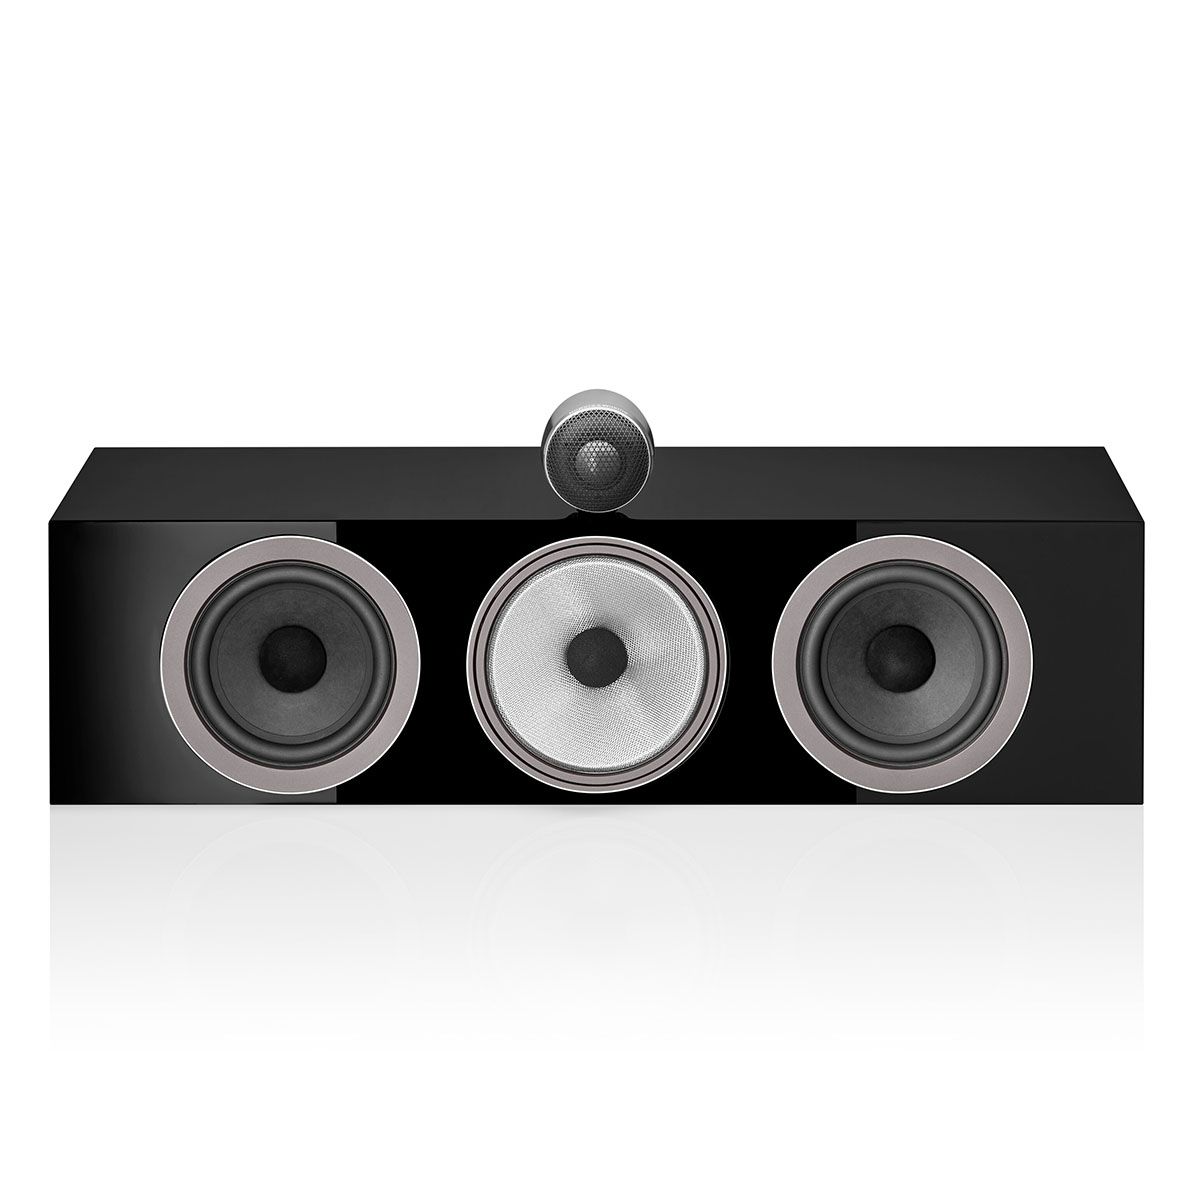 bowers and wilkins htm 71 s3 center channel speaker black